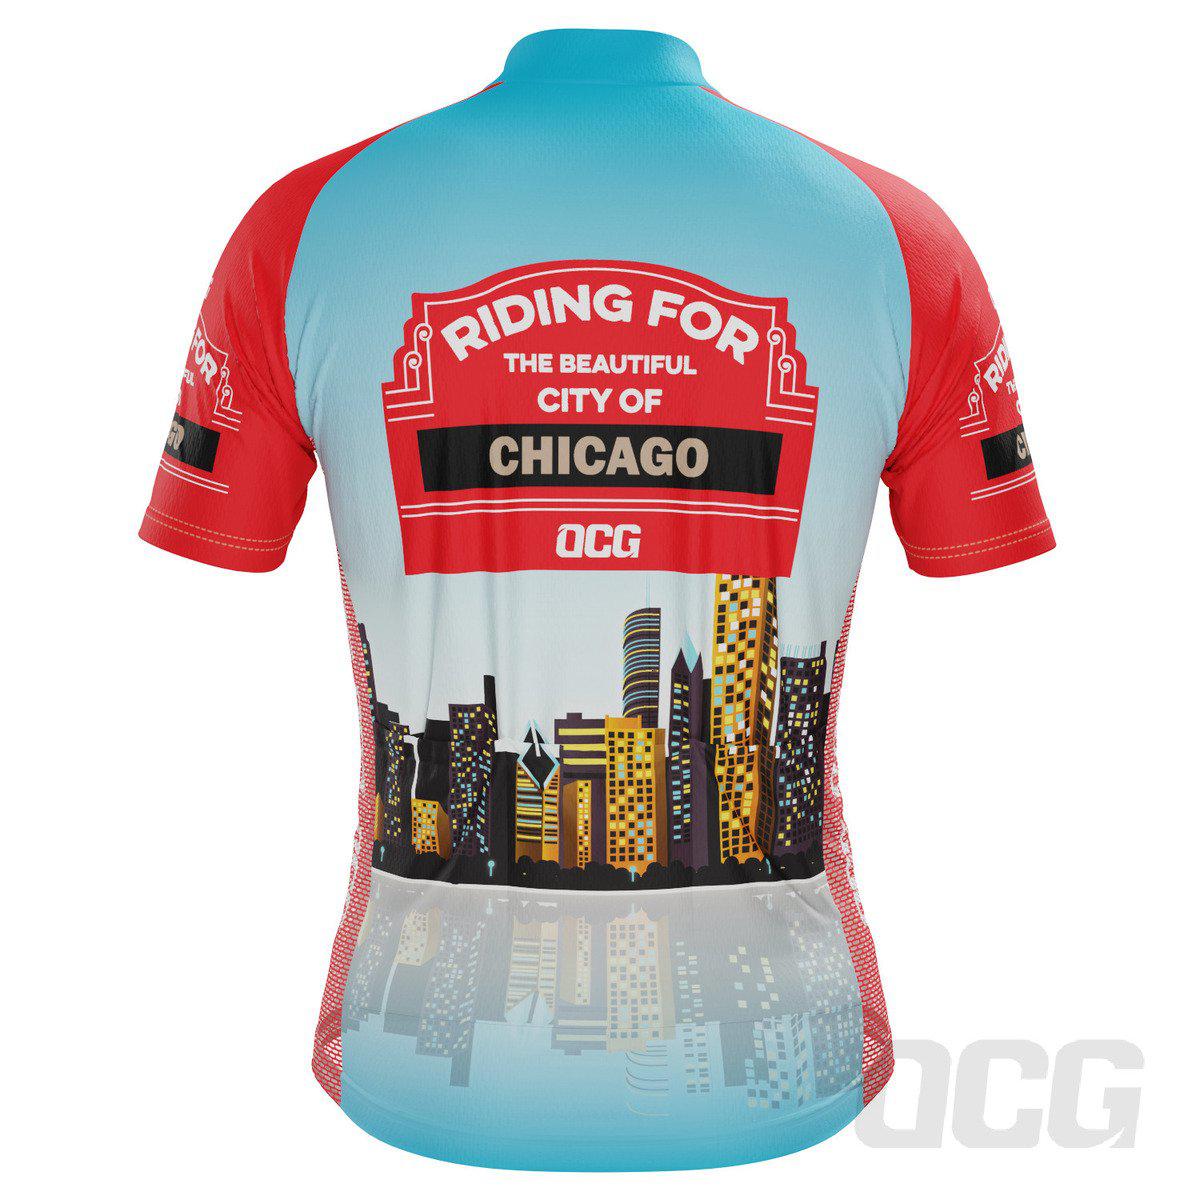 Men's City of Chicago Short Sleeve Cycling Jersey